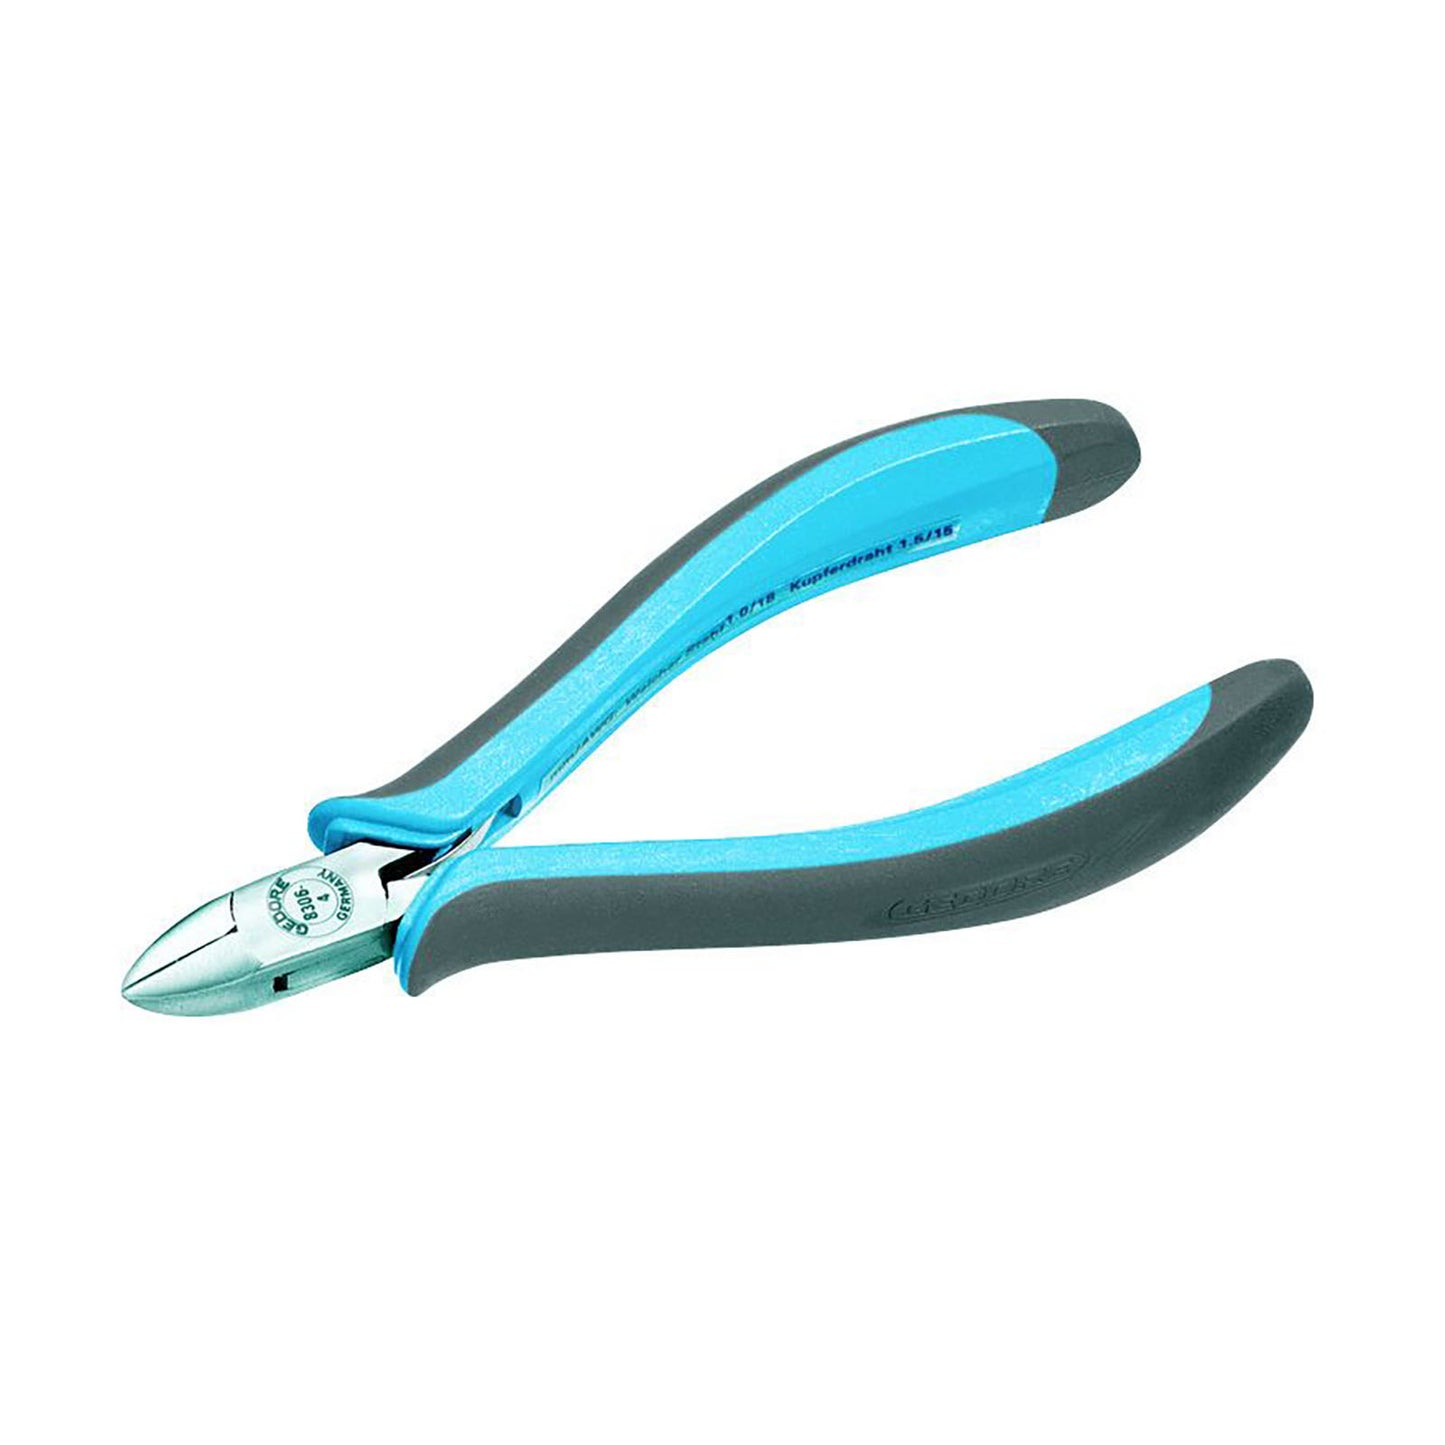 GEDORE 8306-4 - Electronic Cutting Pliers (6727180)